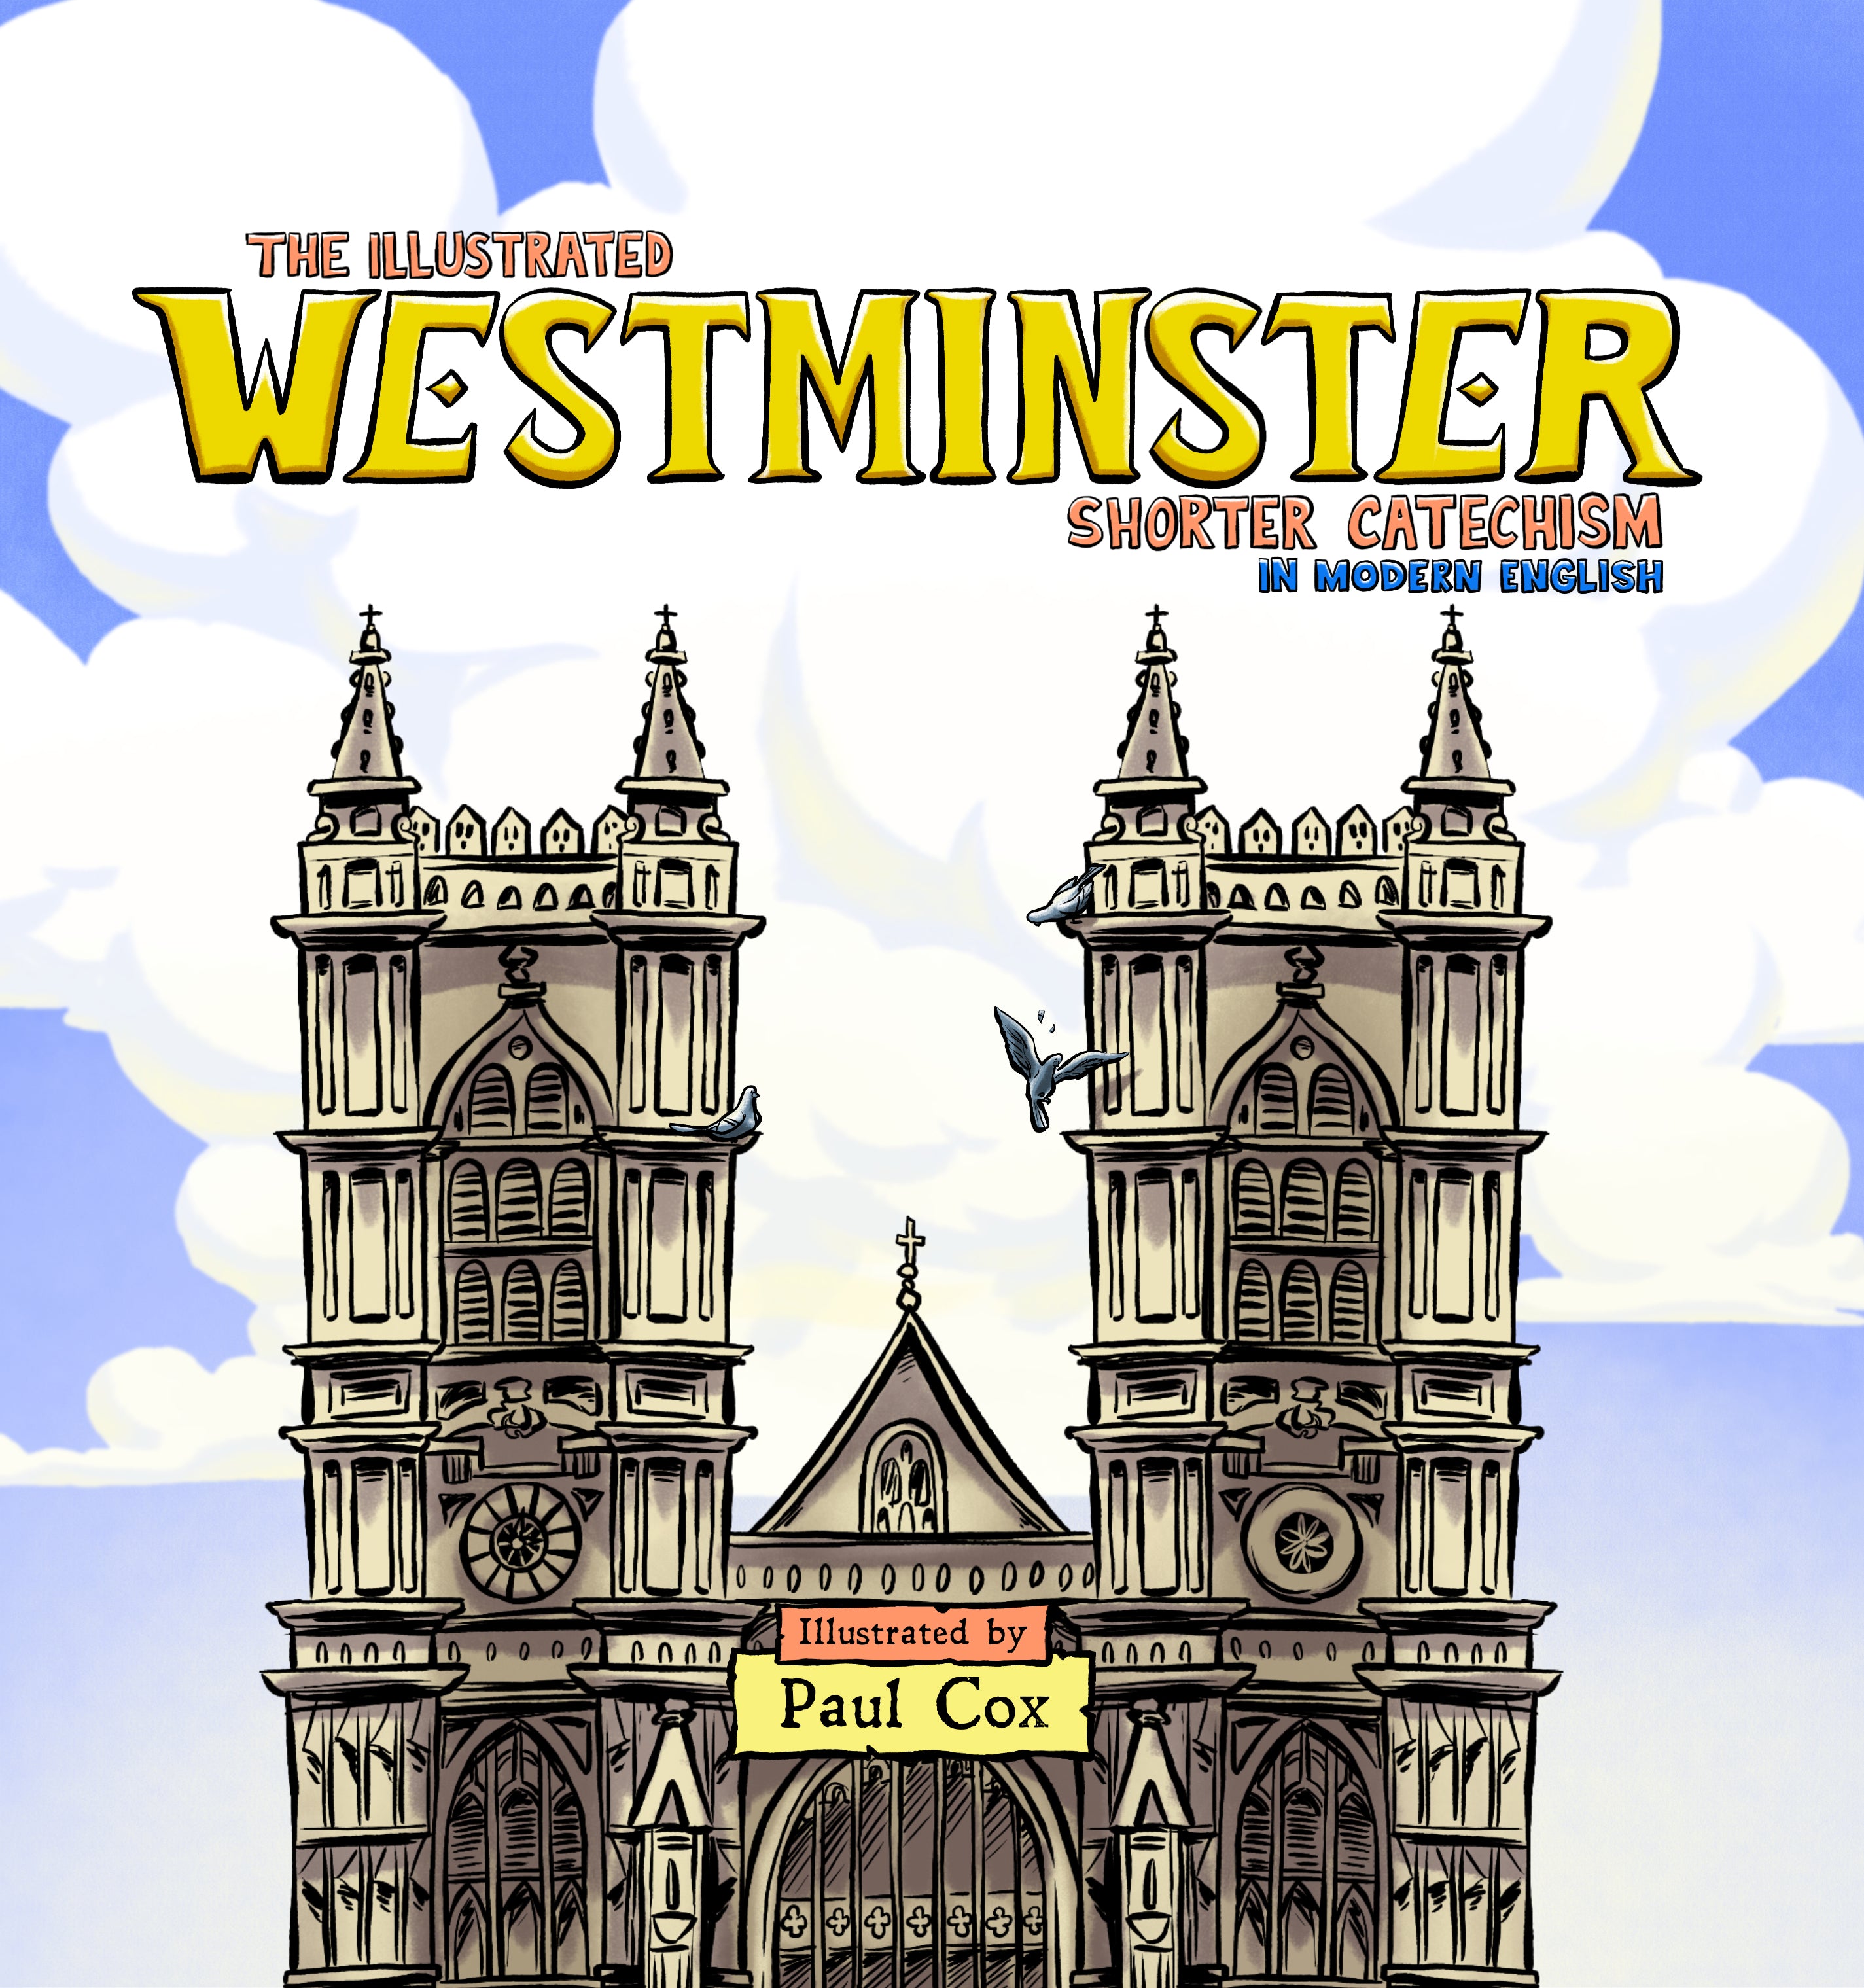 Image of The Illustrated Westminster Shorter Catechism in Modern English